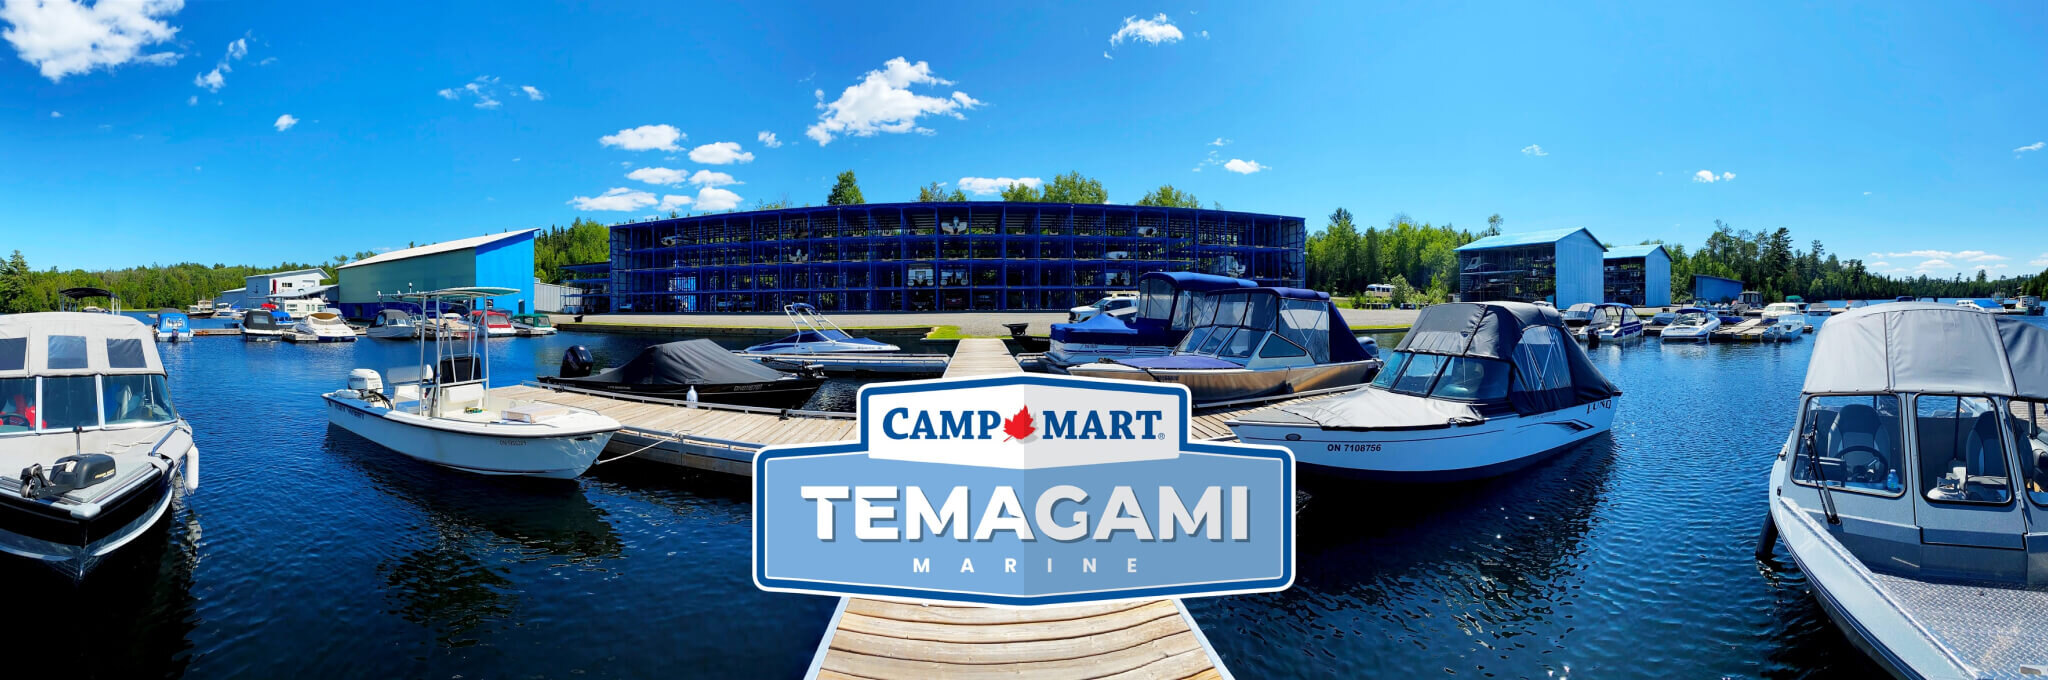 Temagami Marine Pre-Owned Inventory